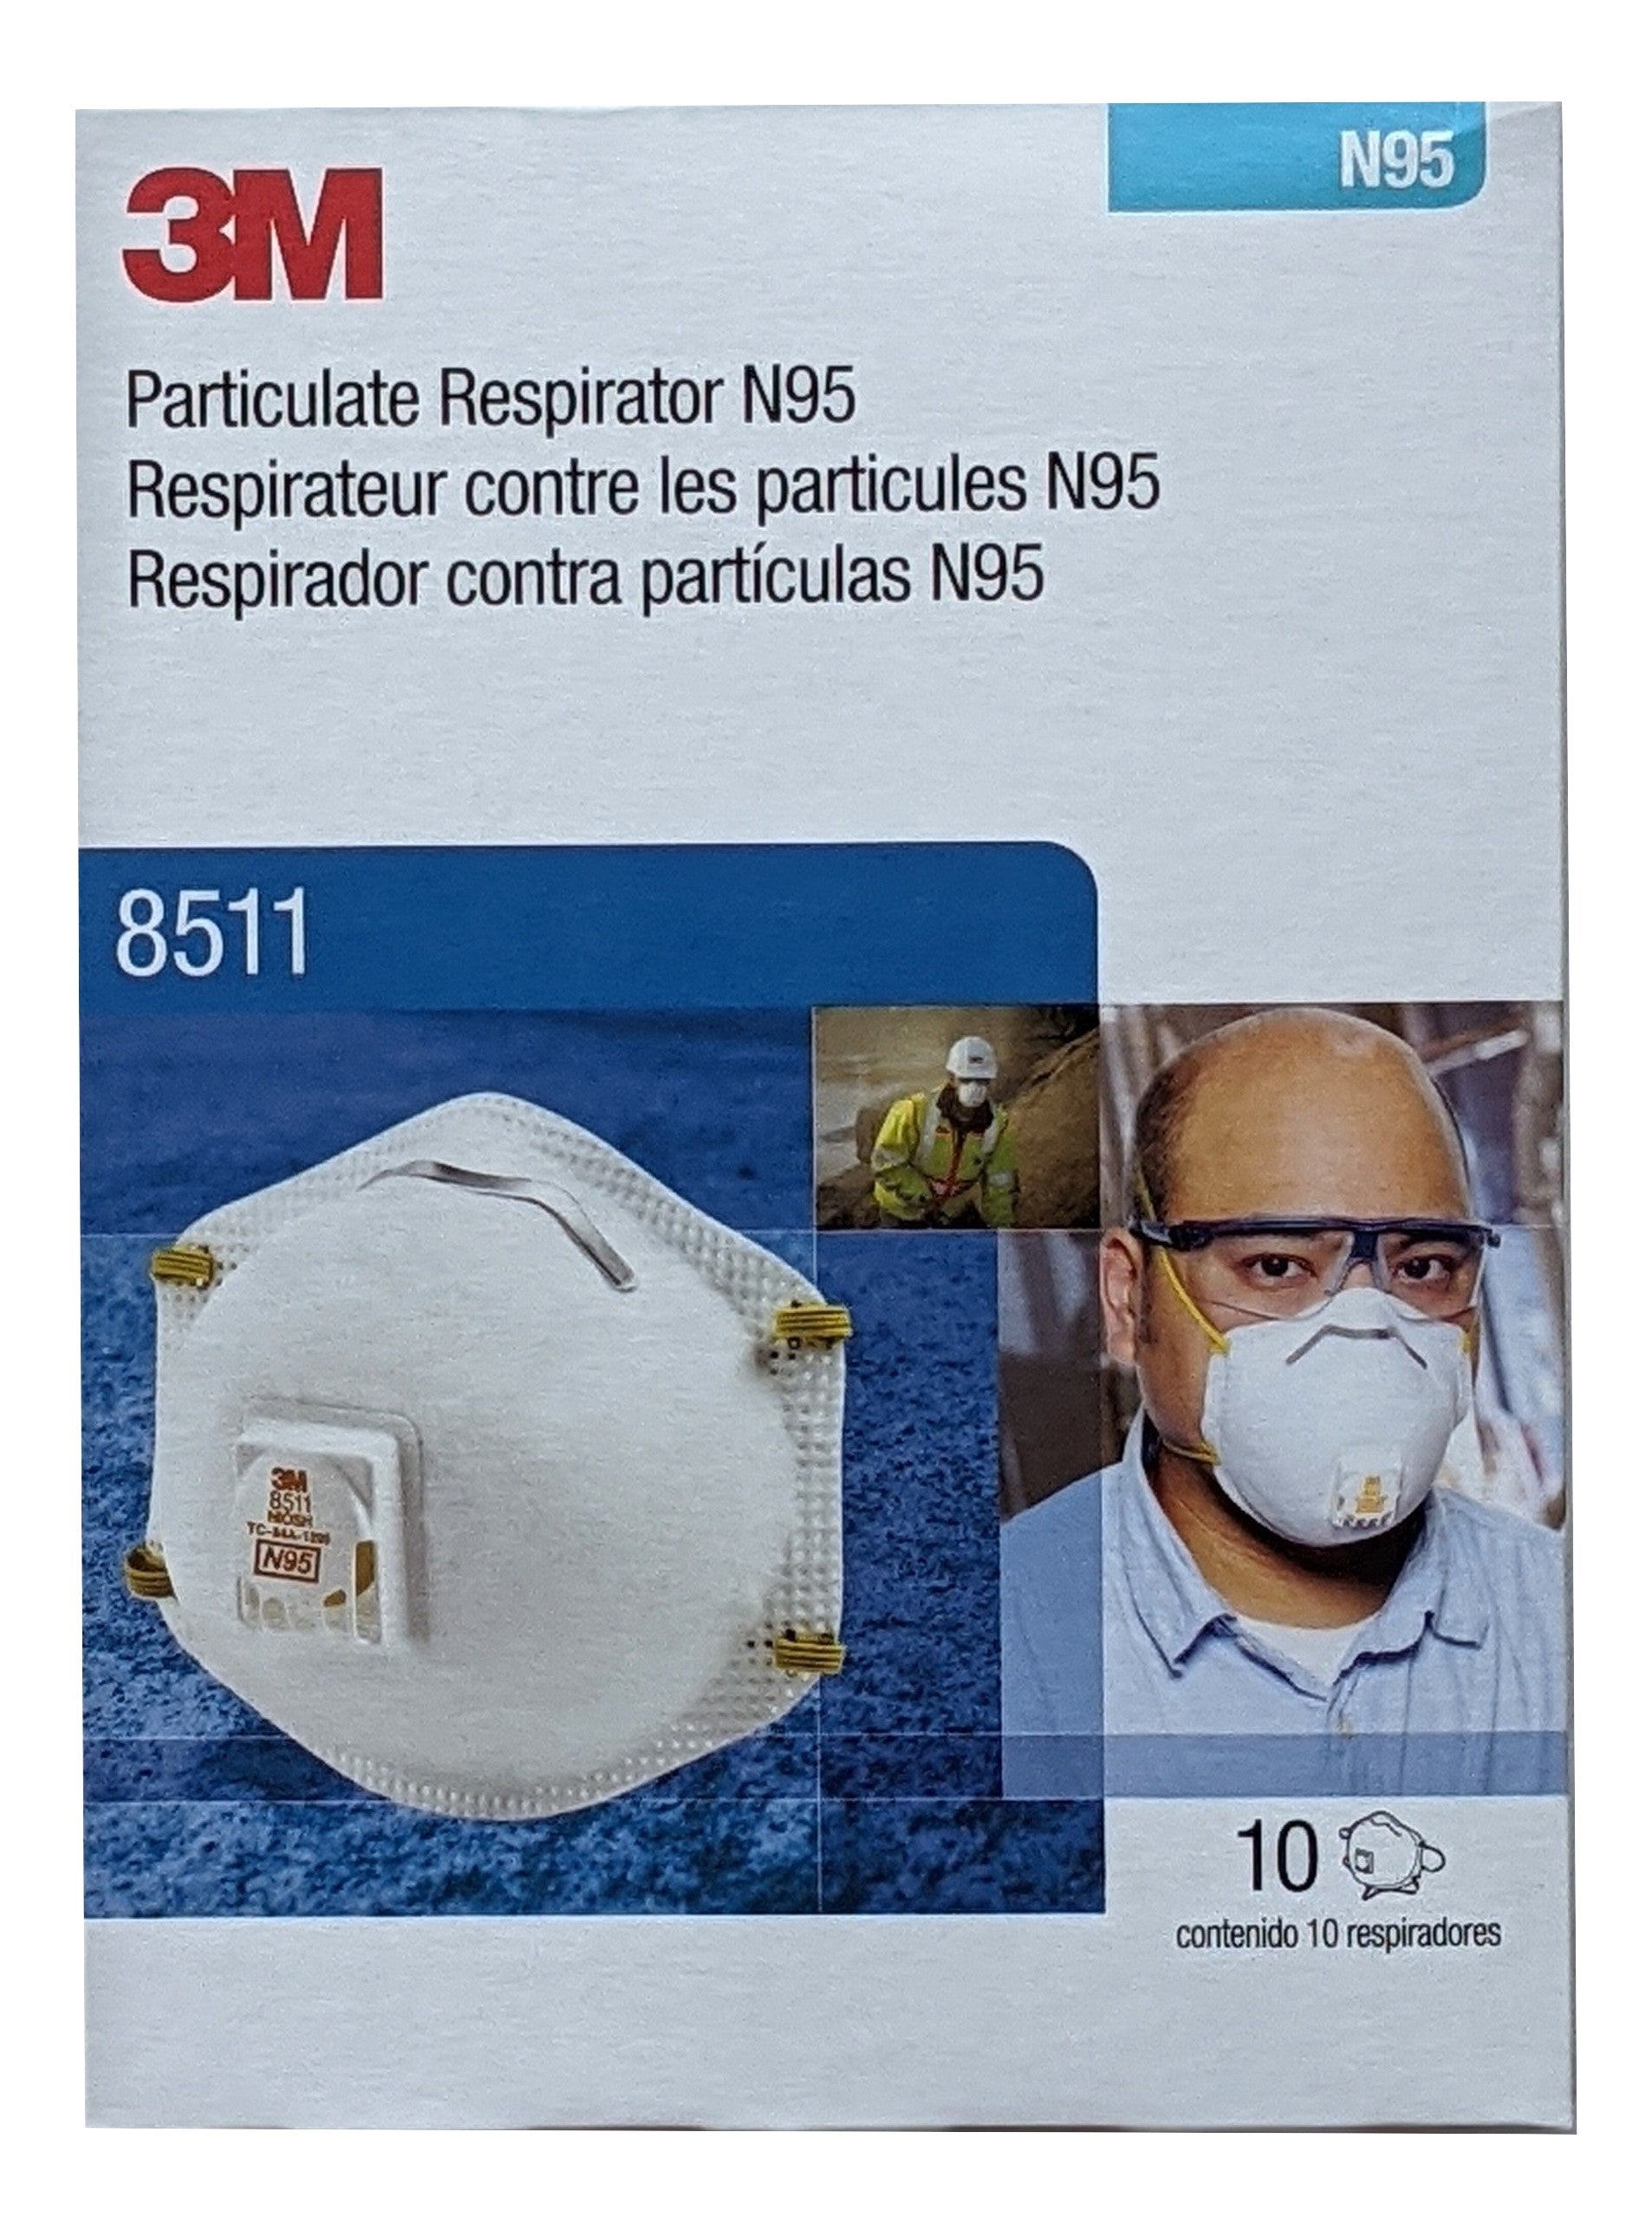 3M 8511 N95 Particulate Respirator Mask, NIOSH approved - 80 pcs (Case of 8 Boxes)